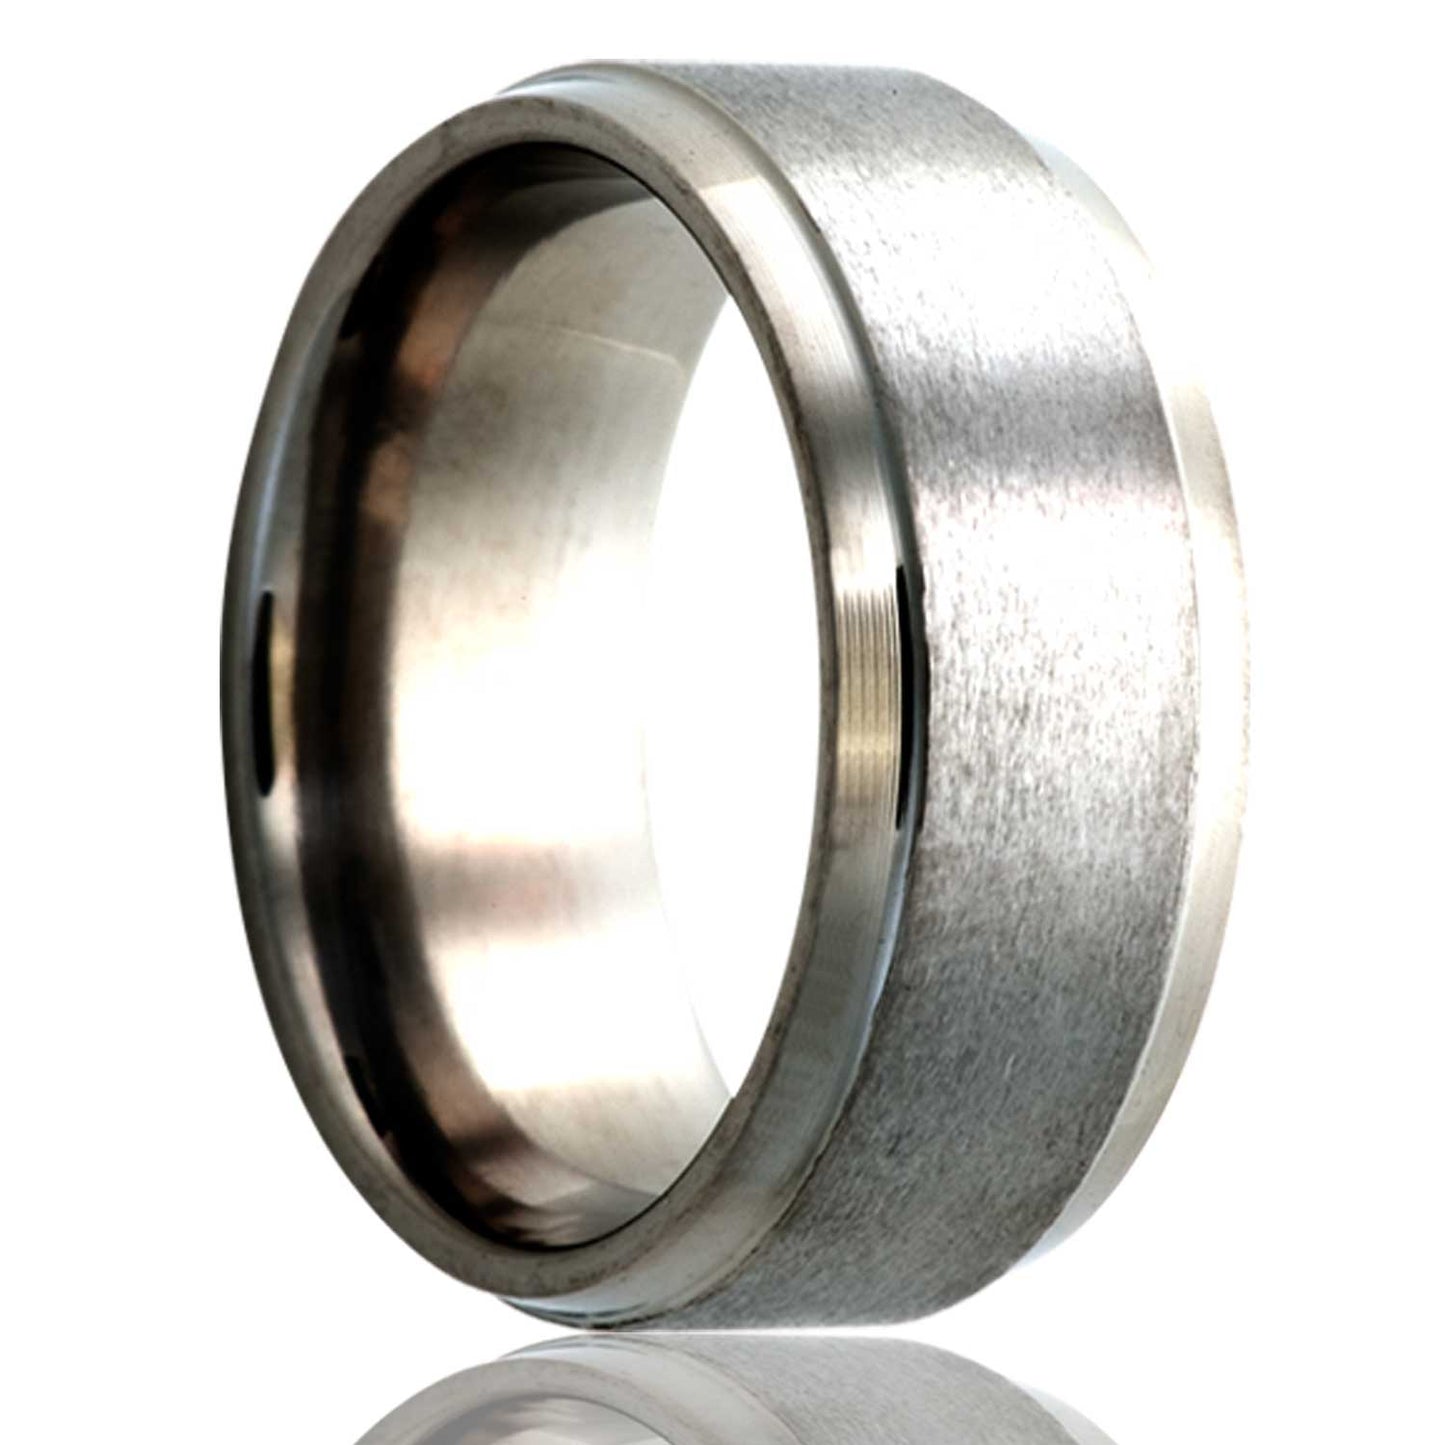 A satin finish titanium wedding band with polished stepped edges displayed on a neutral white background.